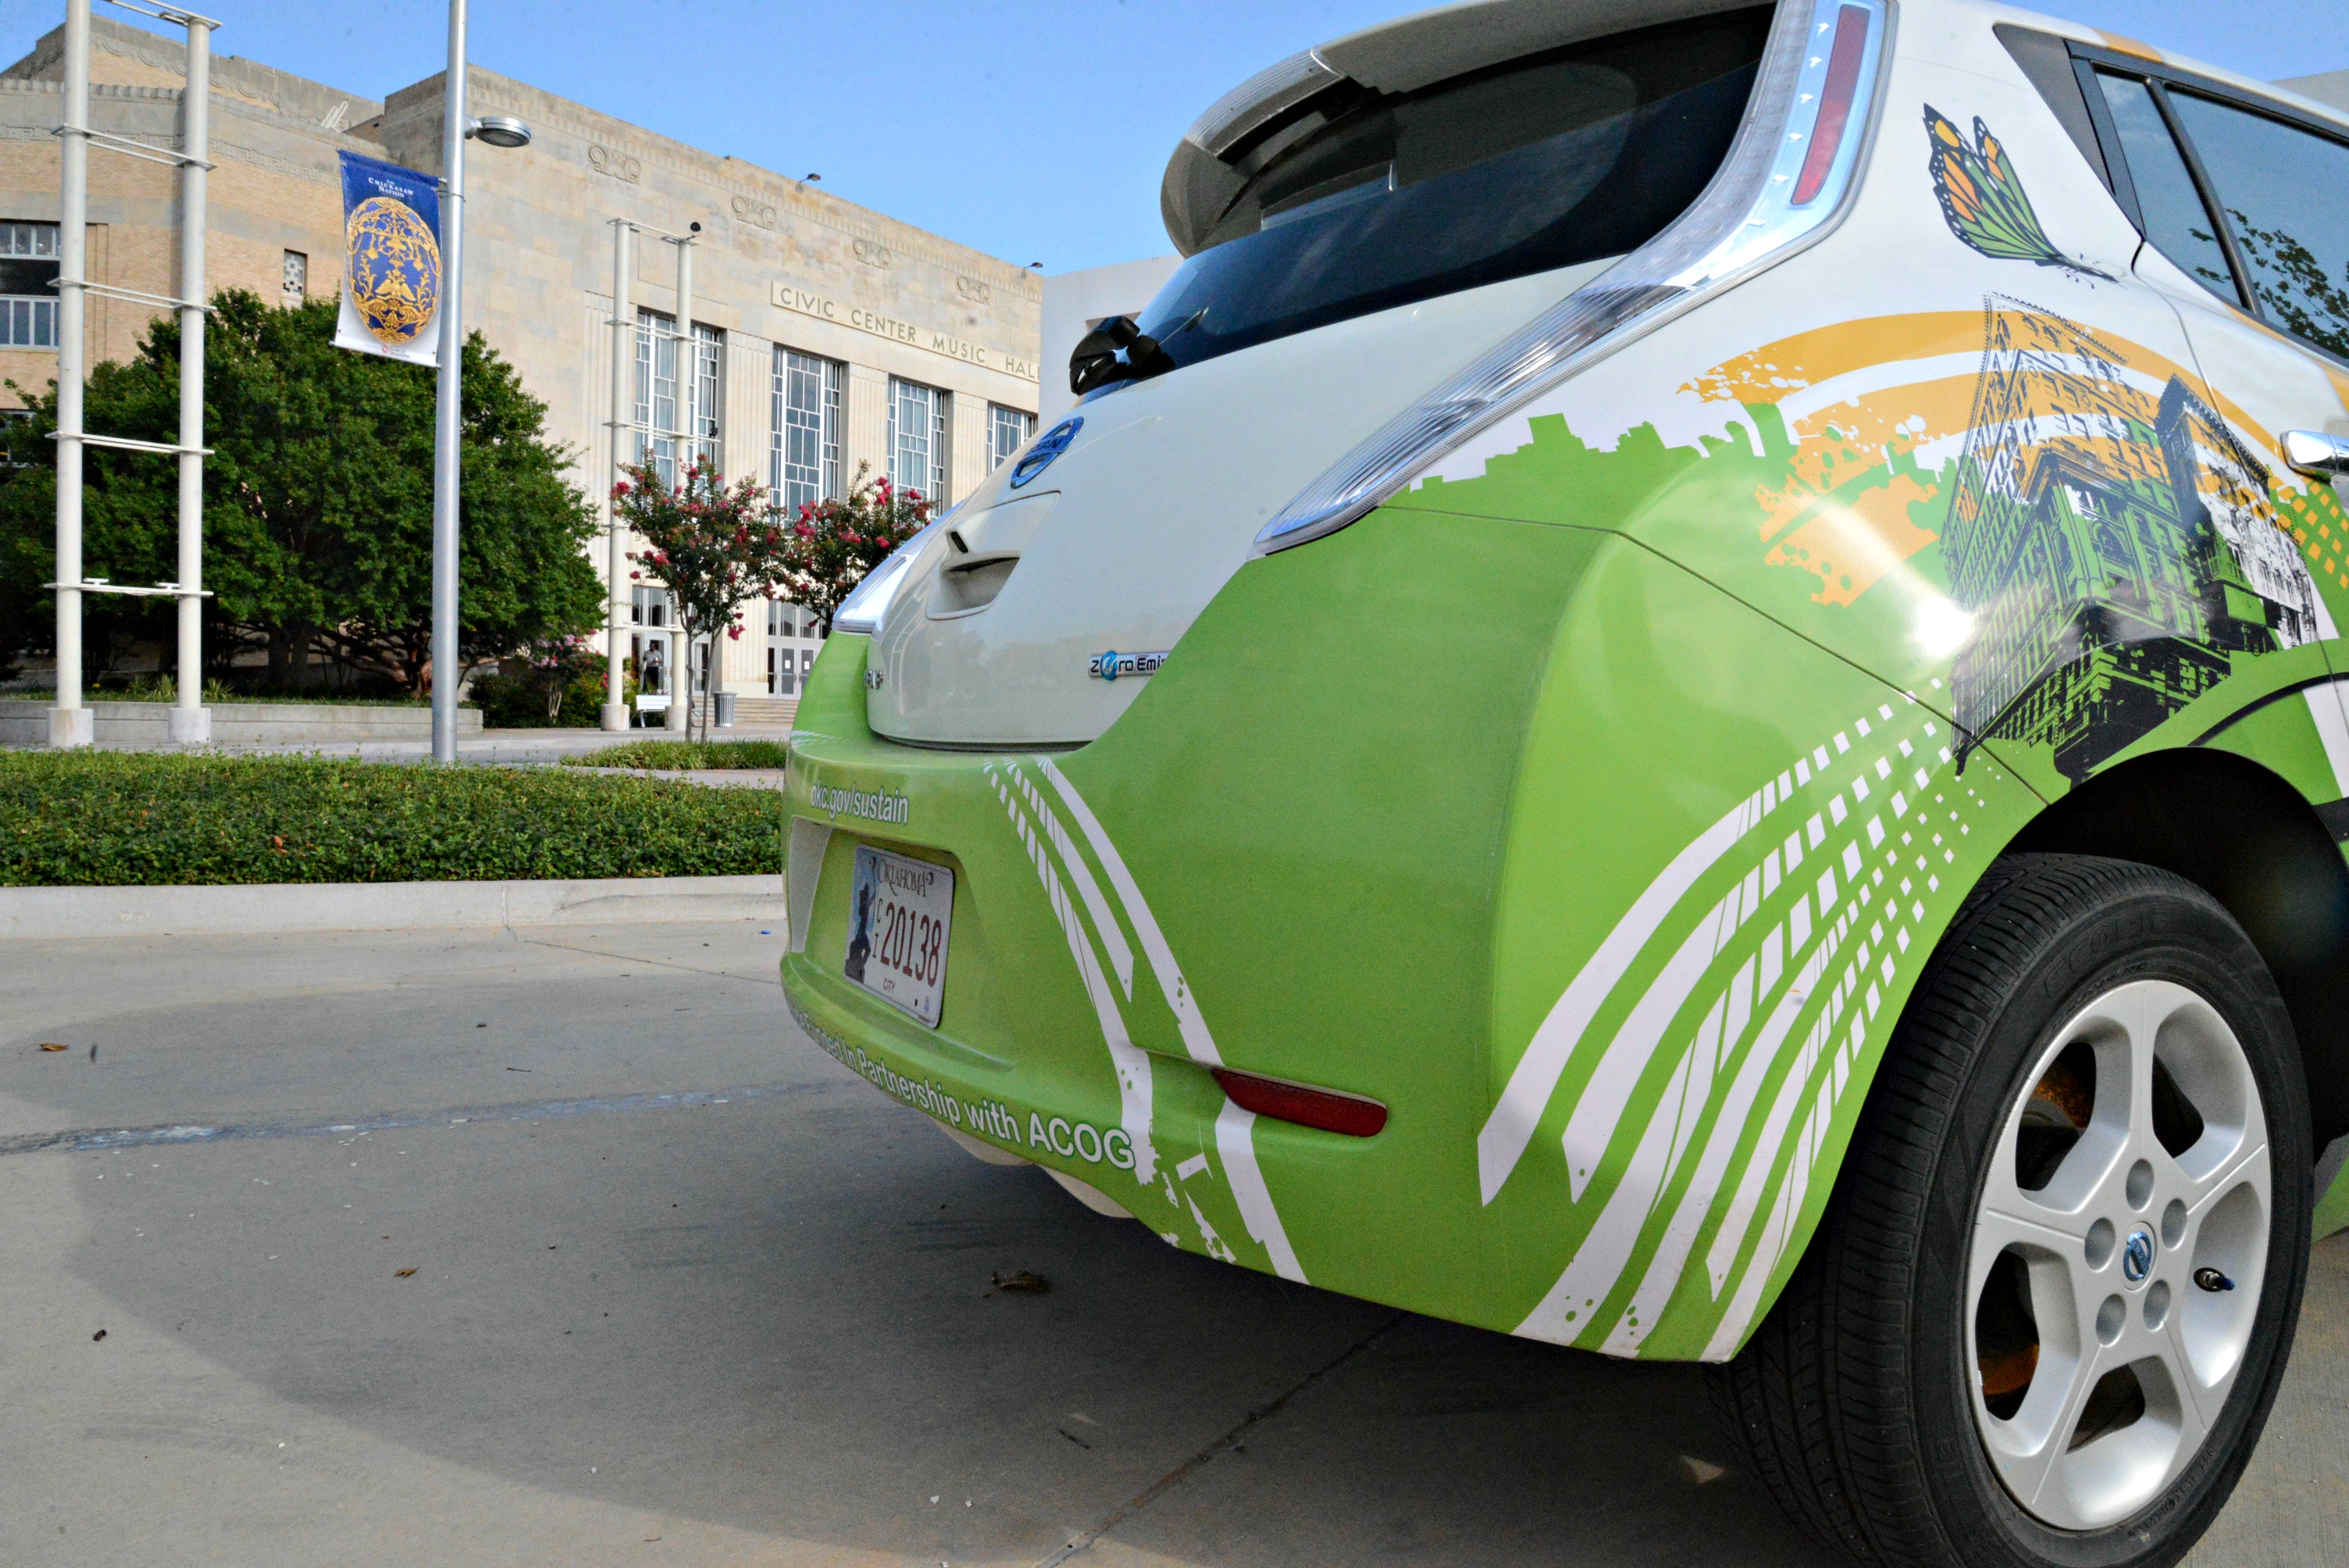 ACOG Clean Citie Car in front of Oklahoma City Civic Center